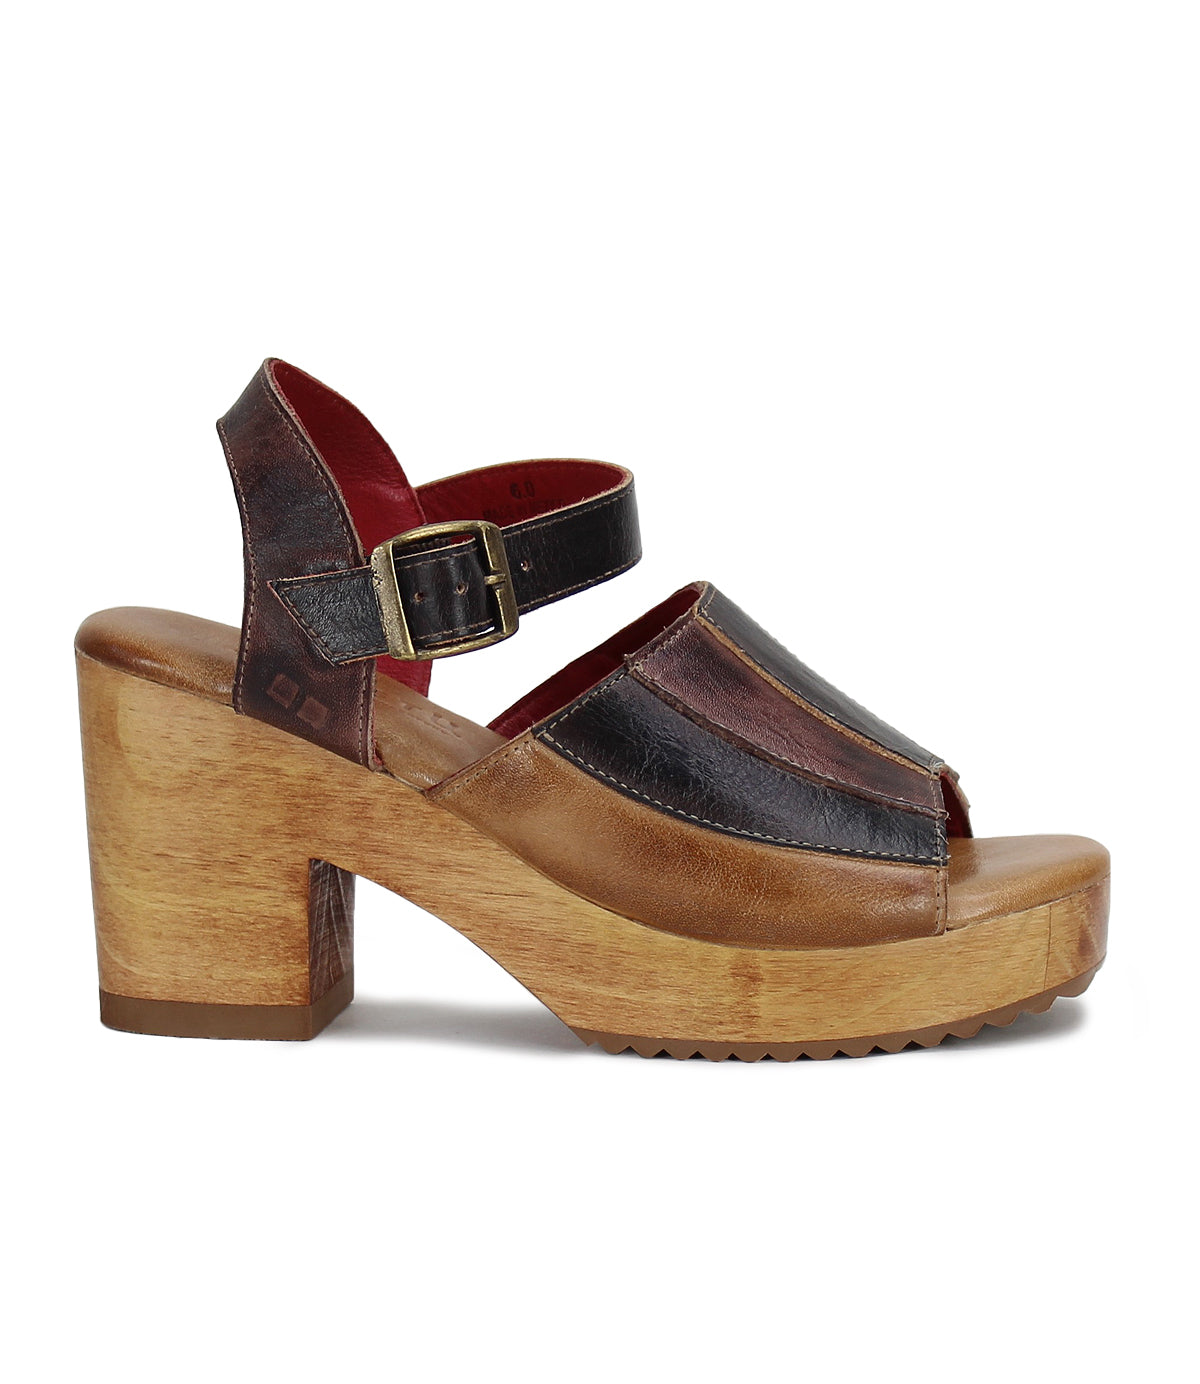 A Bed Stu women's Jetsetter sandal with a wooden heel and leather straps.